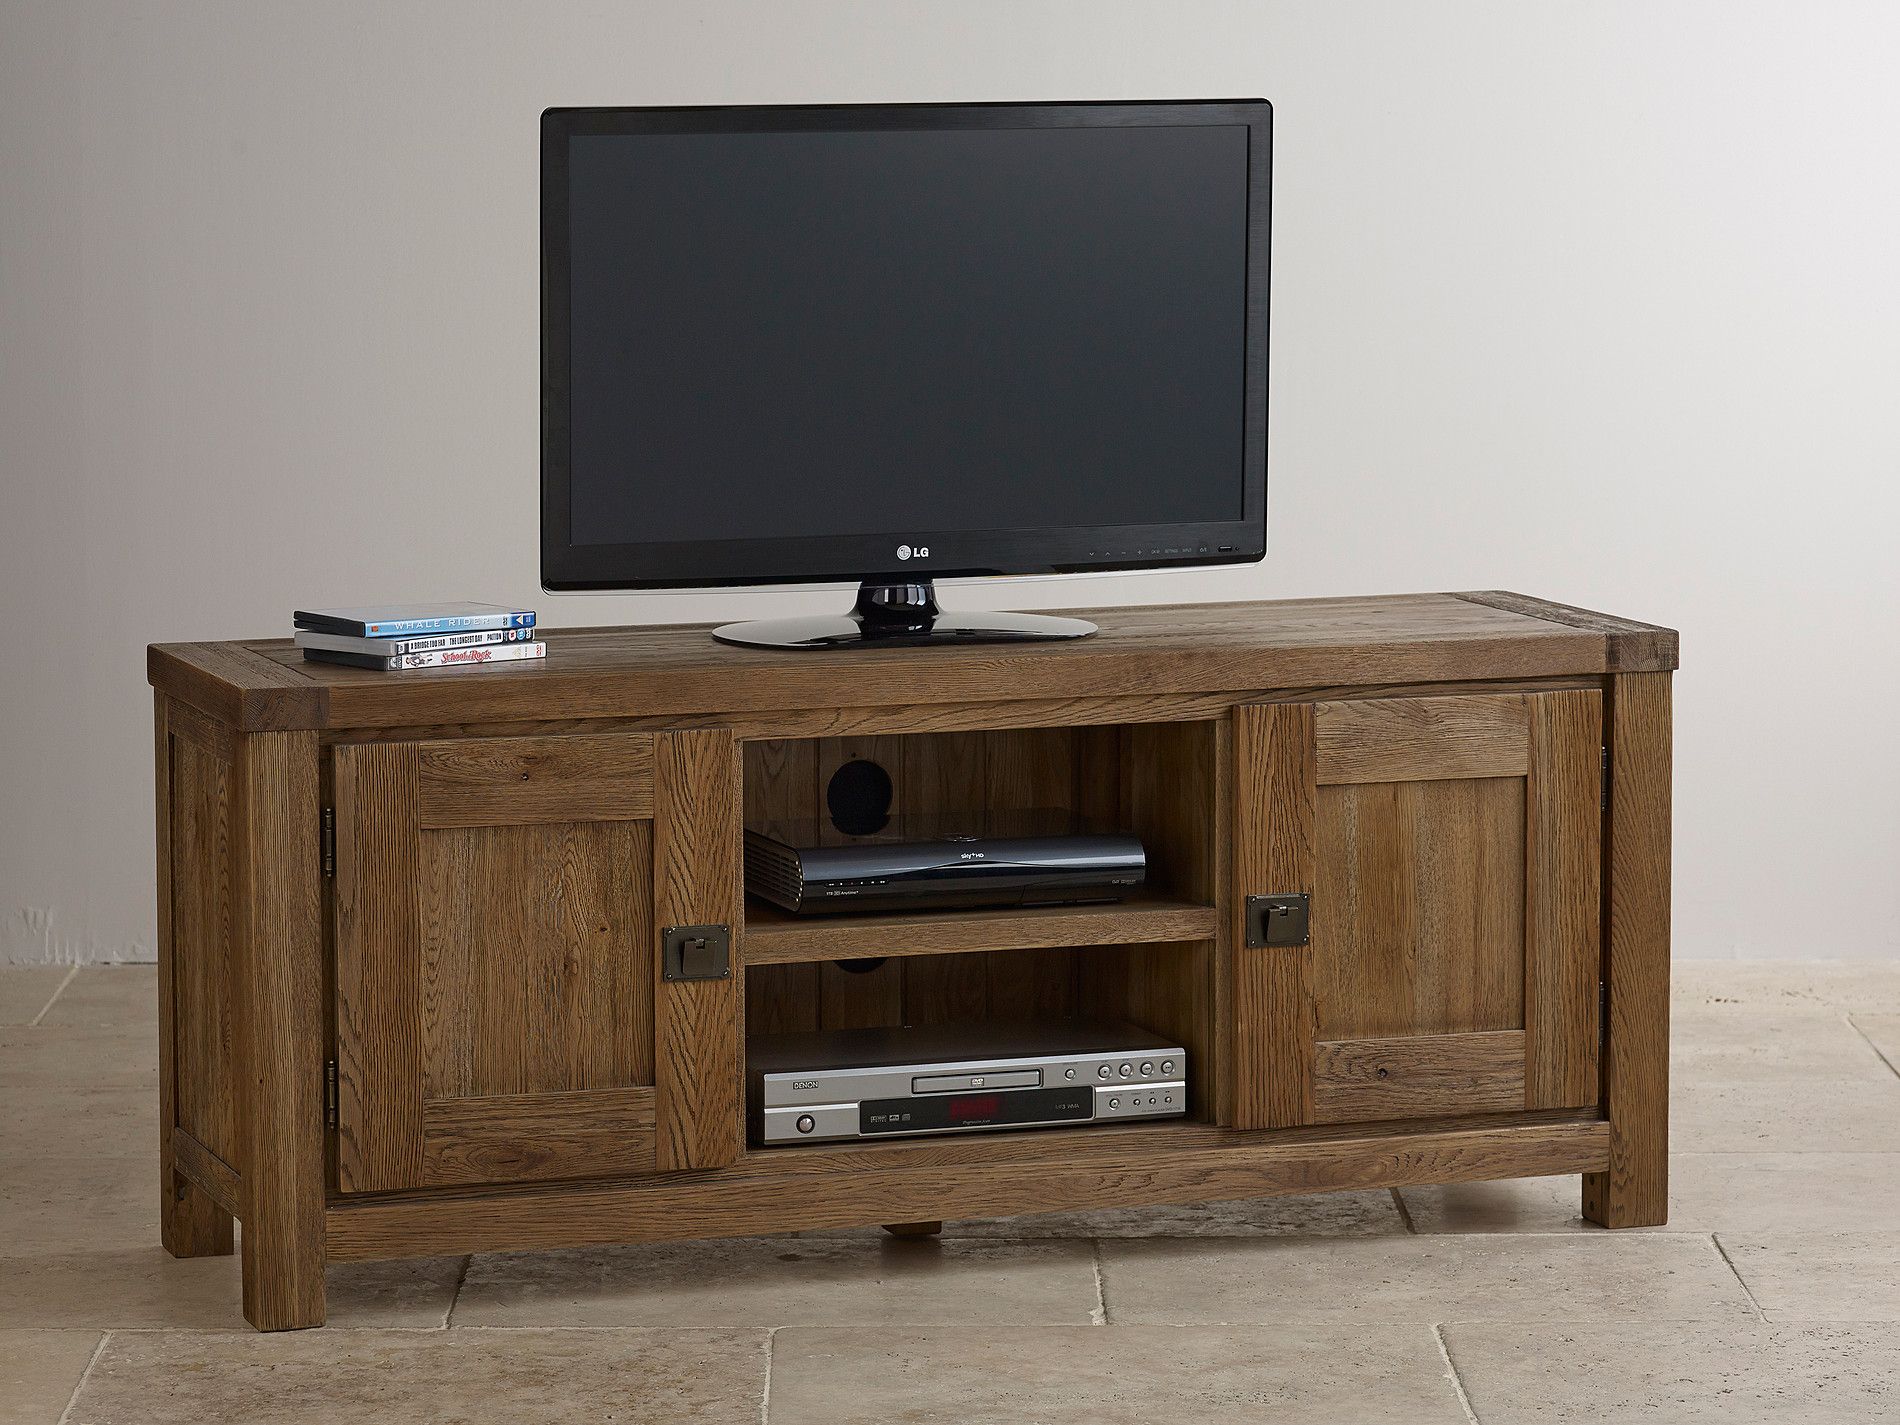 Brushed Solid Oak Widescreen Tv Cabinet | Living Room Within Widescreen Tv Cabinets (View 2 of 15)